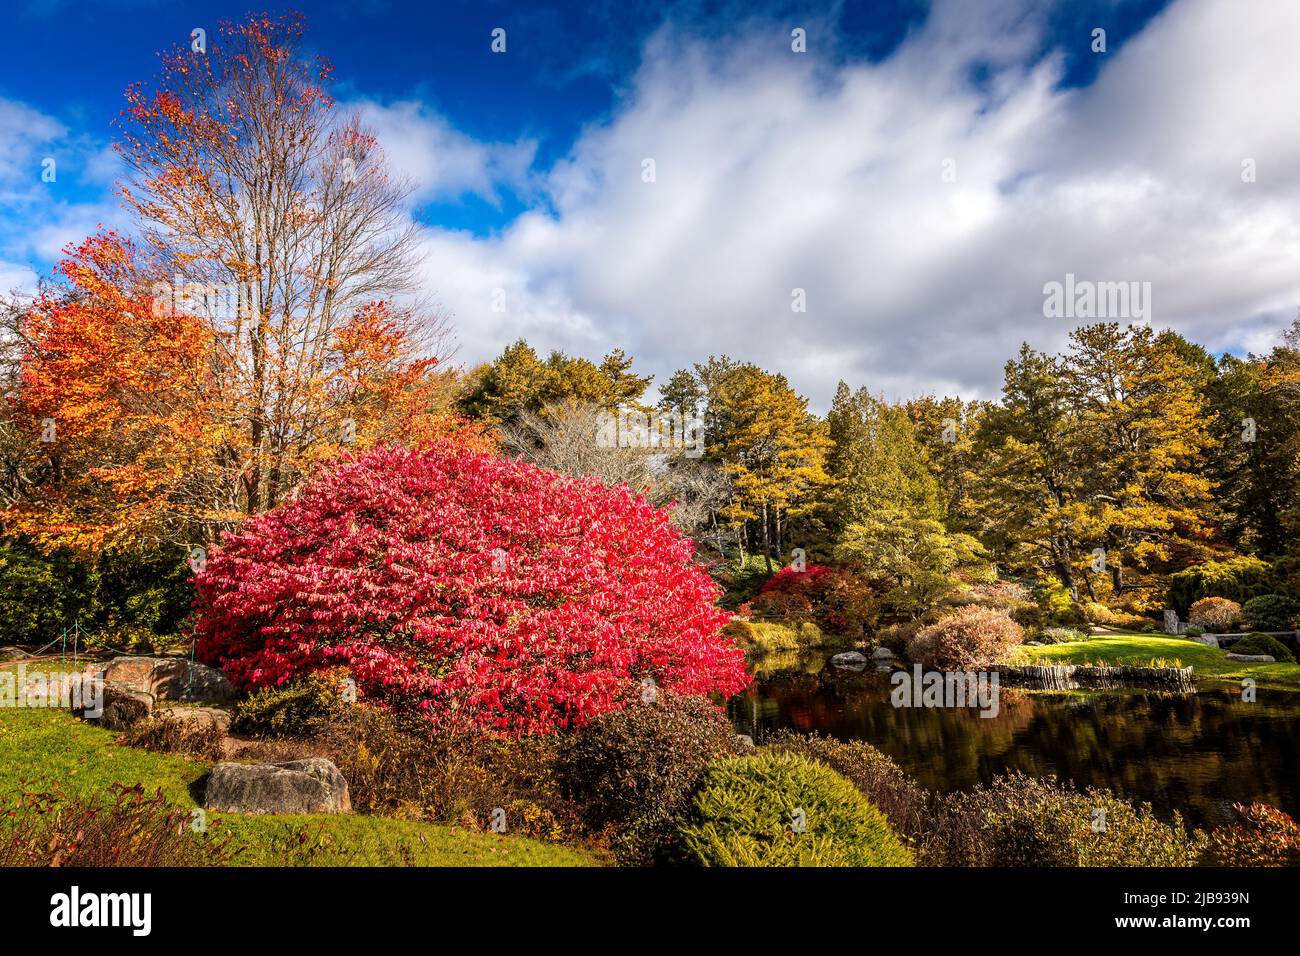 Idyllic liitle pond with colorful changing leaves in fall, New England Stock Photo